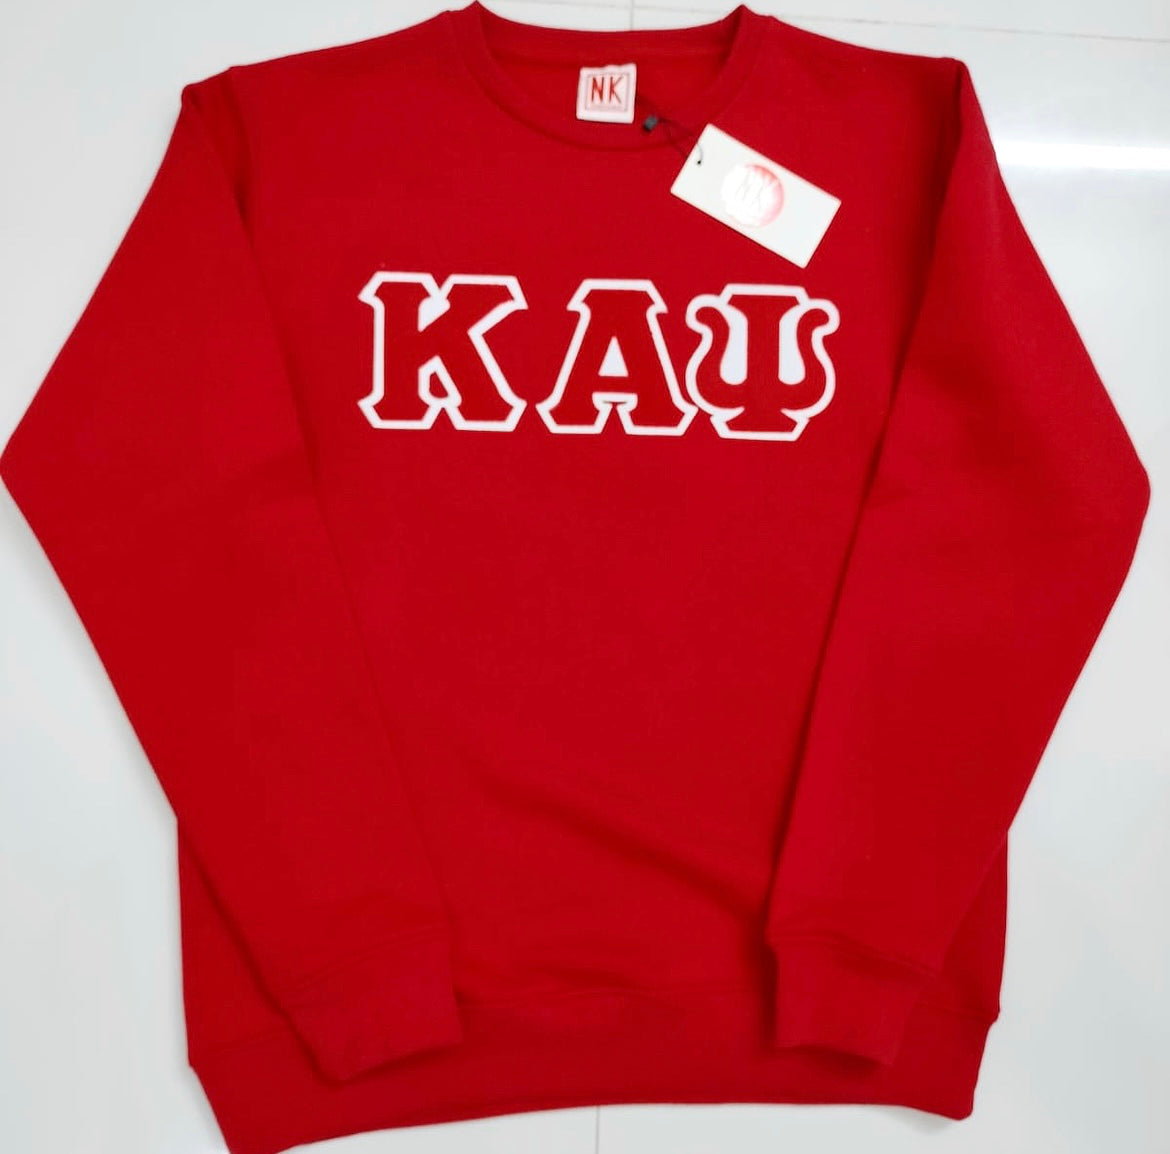 Exclusive Kappa Alpha Psi Double Stitched Appliqué Embroidery Lettered Red Sweater. This is the perfect long-sleeved Sweater to wear while showing off your Kappa Alpha Psi fraternity lettering. A comfortable 100% cotton tee with a twill Greek letters embroidery across the chest give you the perfect fit. This sweater is also a perfect gift for your favorite Kappa Man.